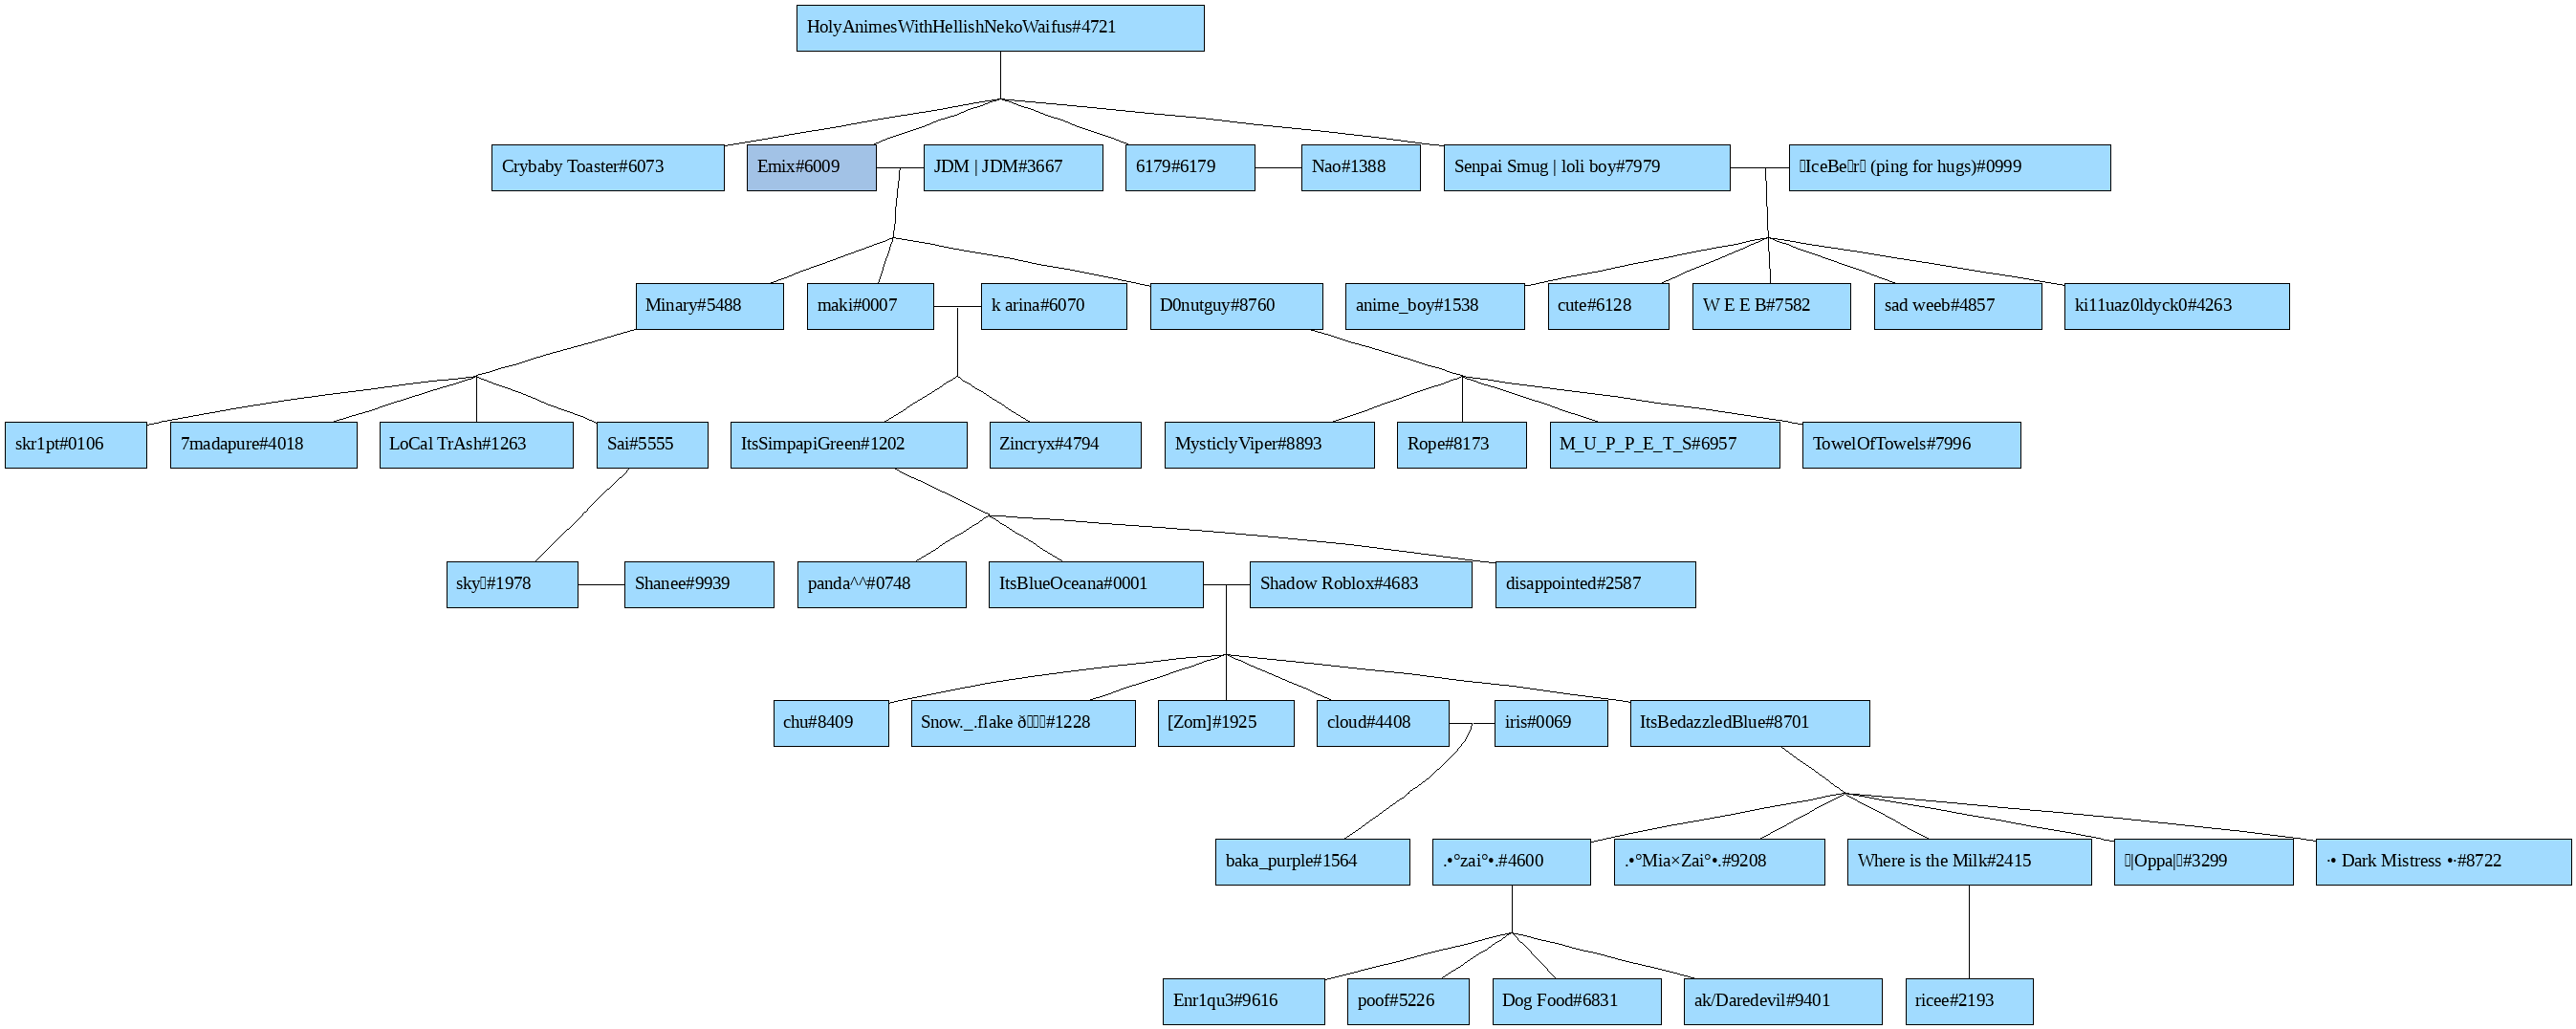 A large family tree composed entirely of Discord users